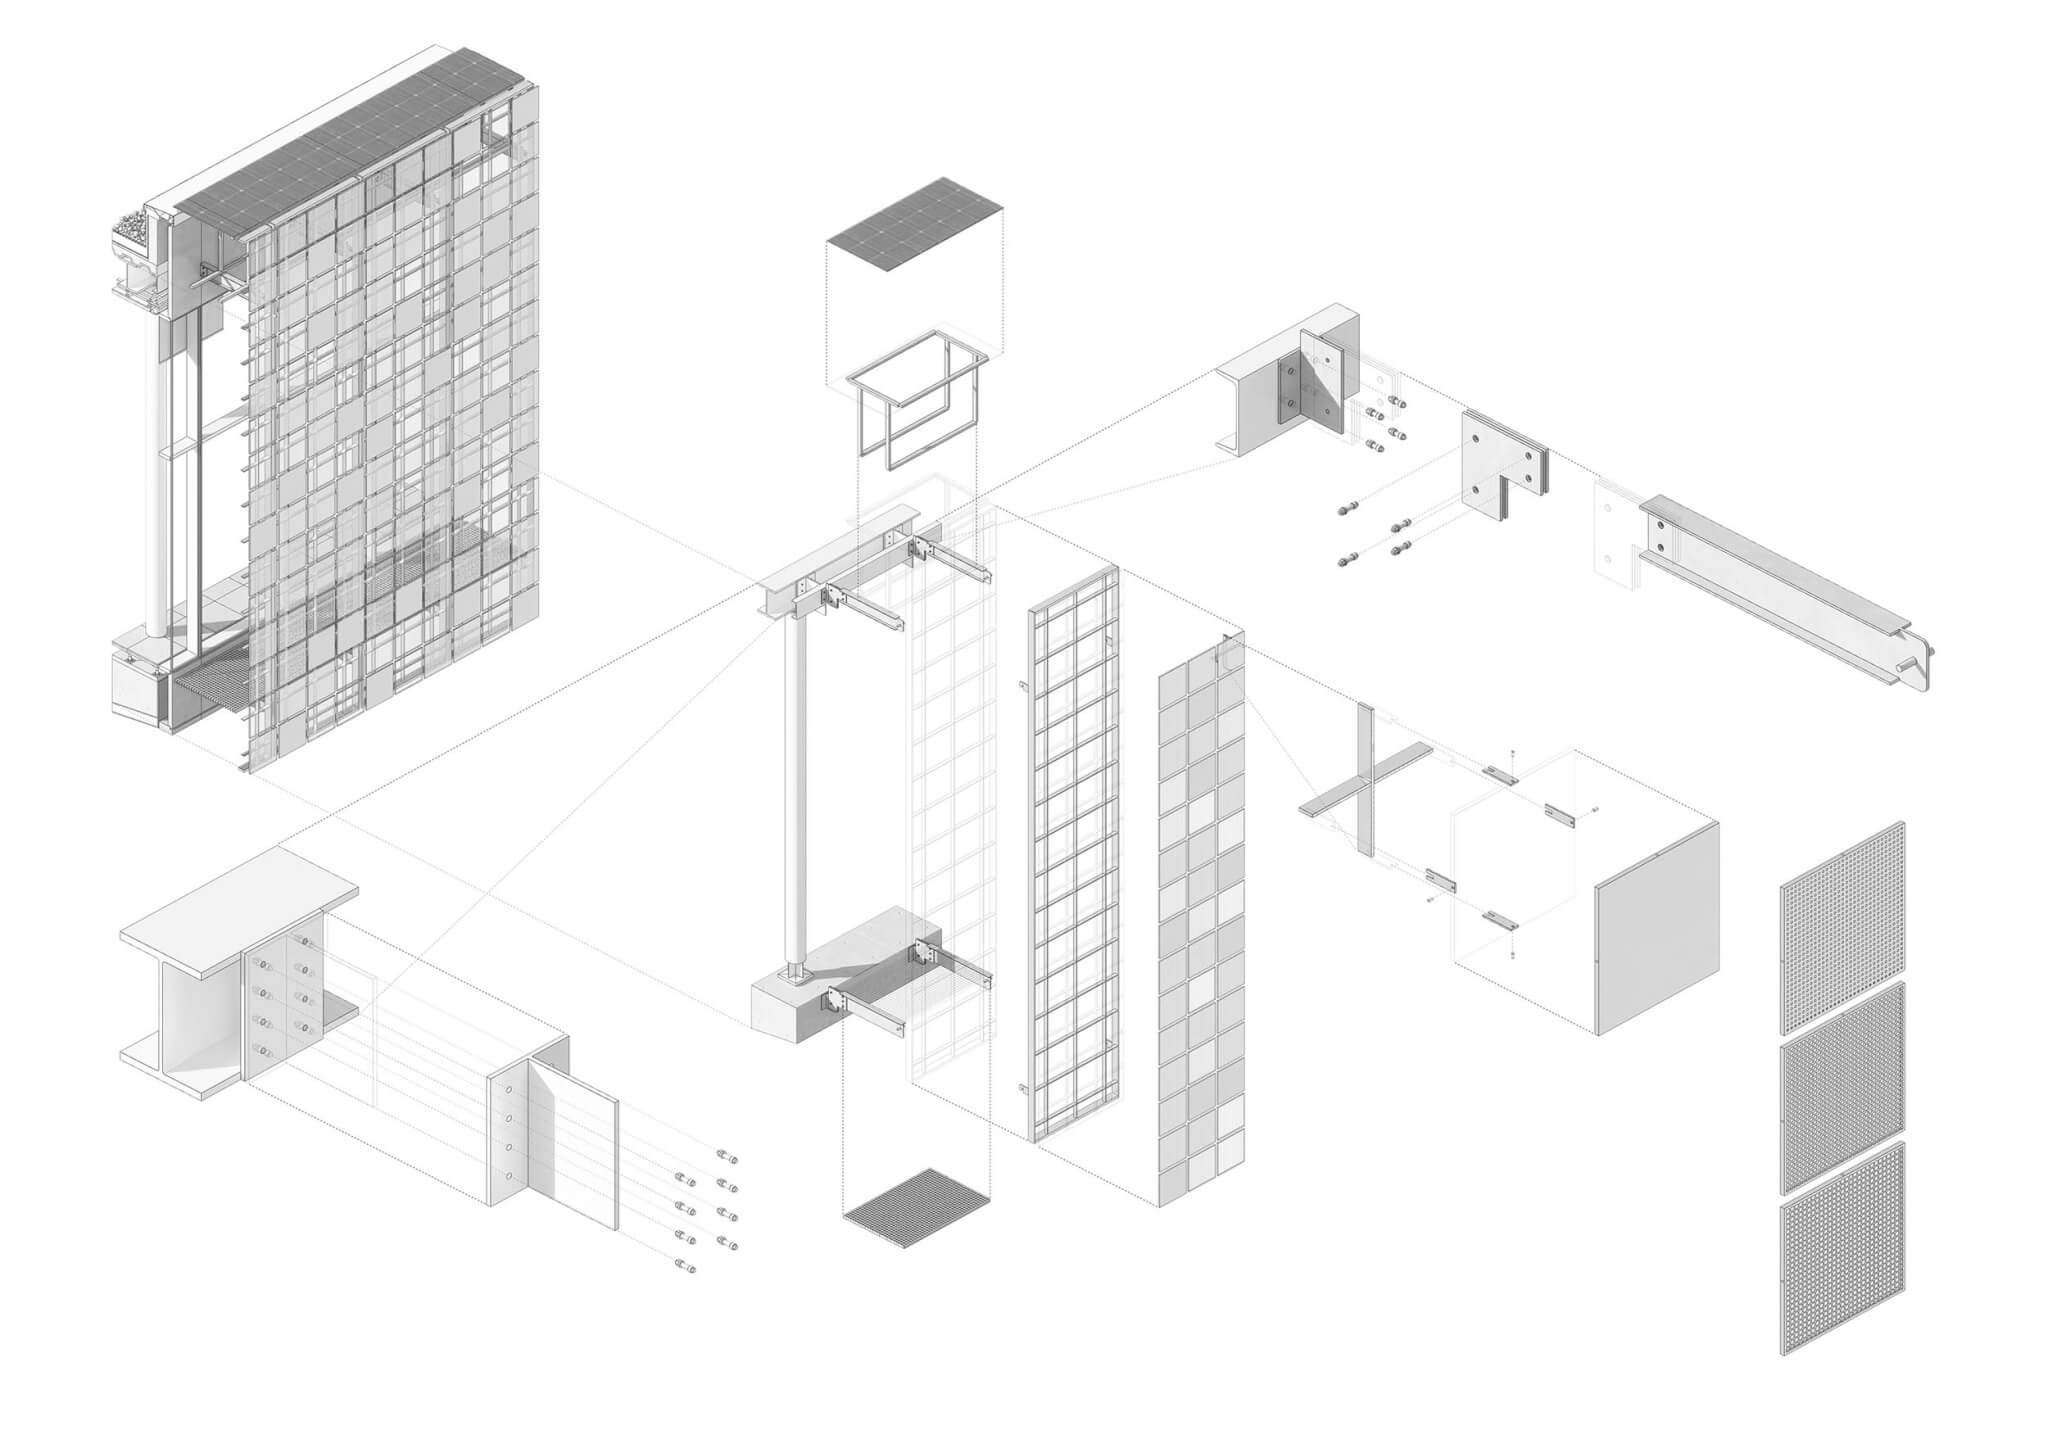 exploded diagram of facade system